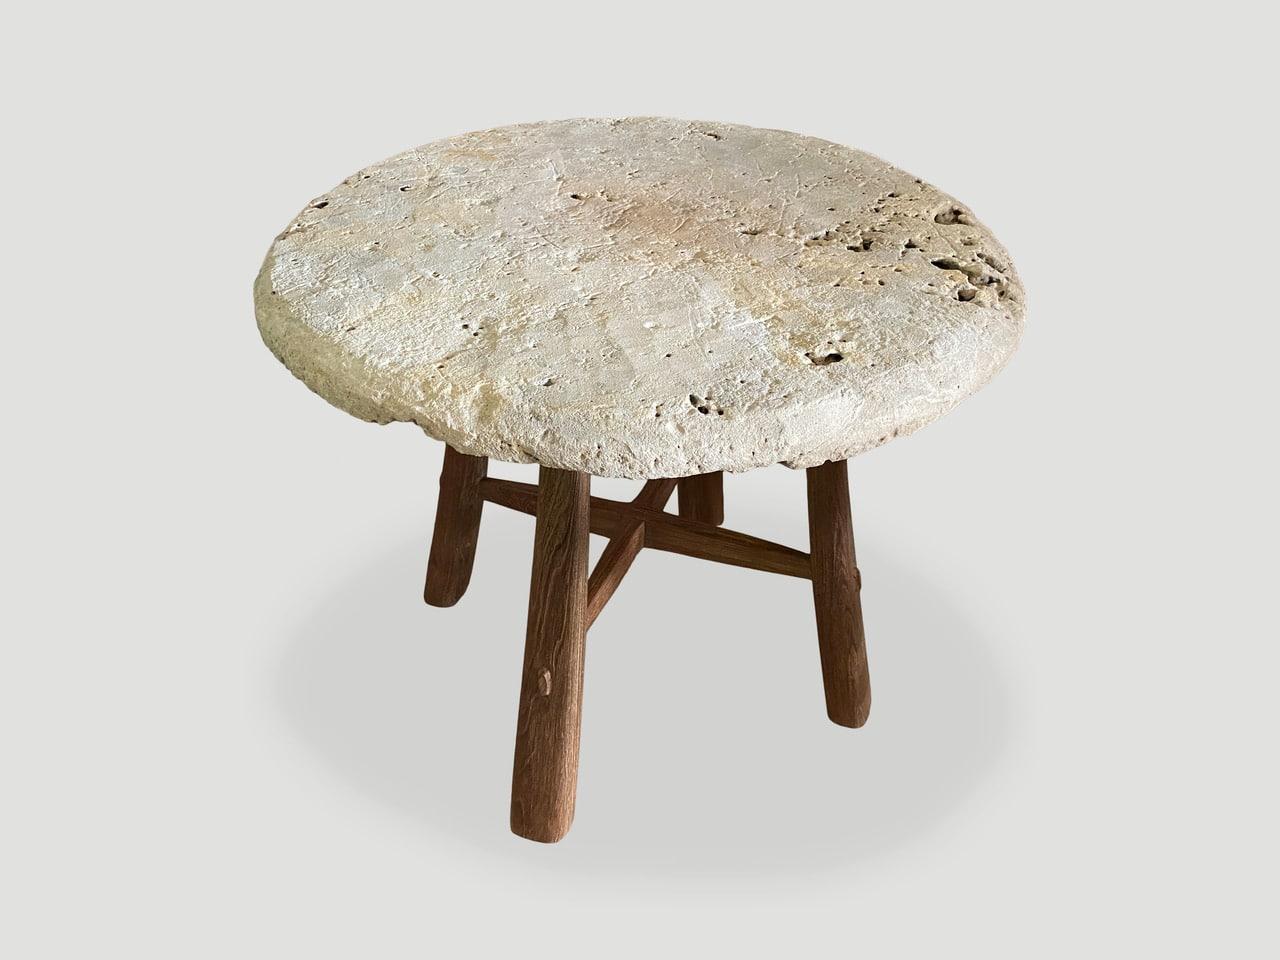 Impressive two inch thick antique stone from the island of Sumba. We have added teak wood mid century style legs in contrast. Perfect as a side table, entrance table or a small dining table. 

Own an Andrianna Shamaris original.

Andrianna